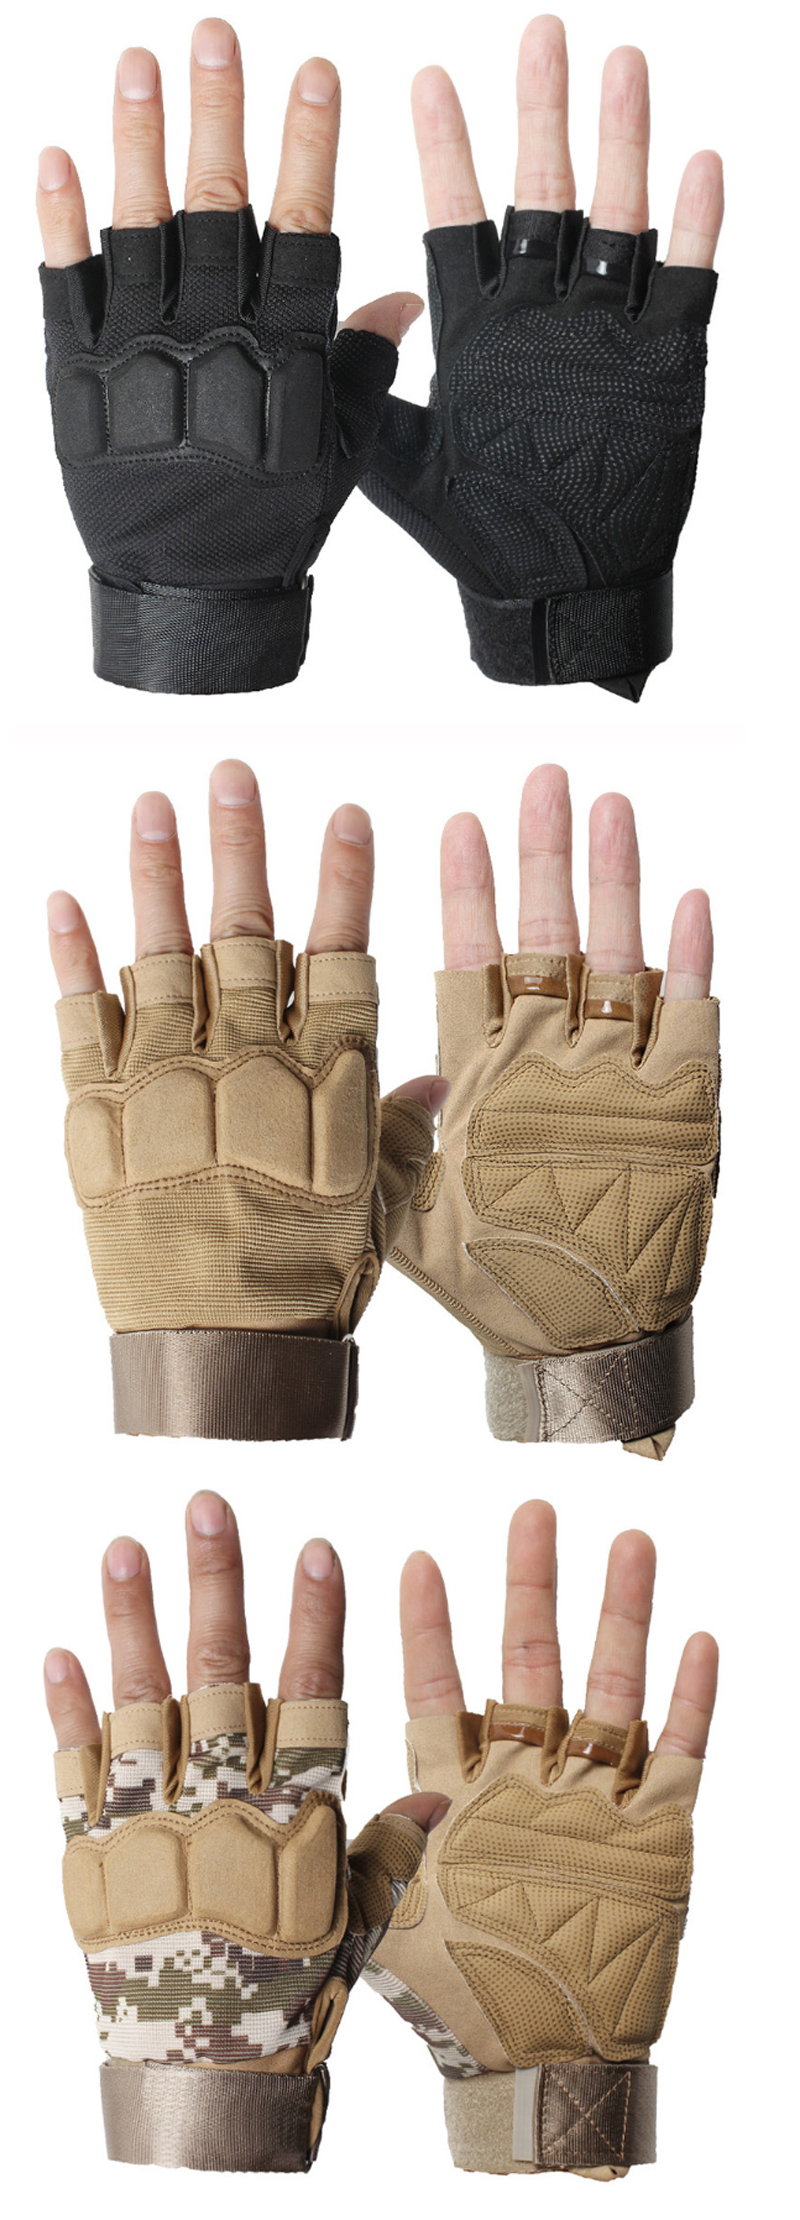 1-Pair-Tactical-Glove-Half-Finger-Gloves-Slip-Resistant-Gloves-For-Cycling-Camping-Hunting-1437800-2